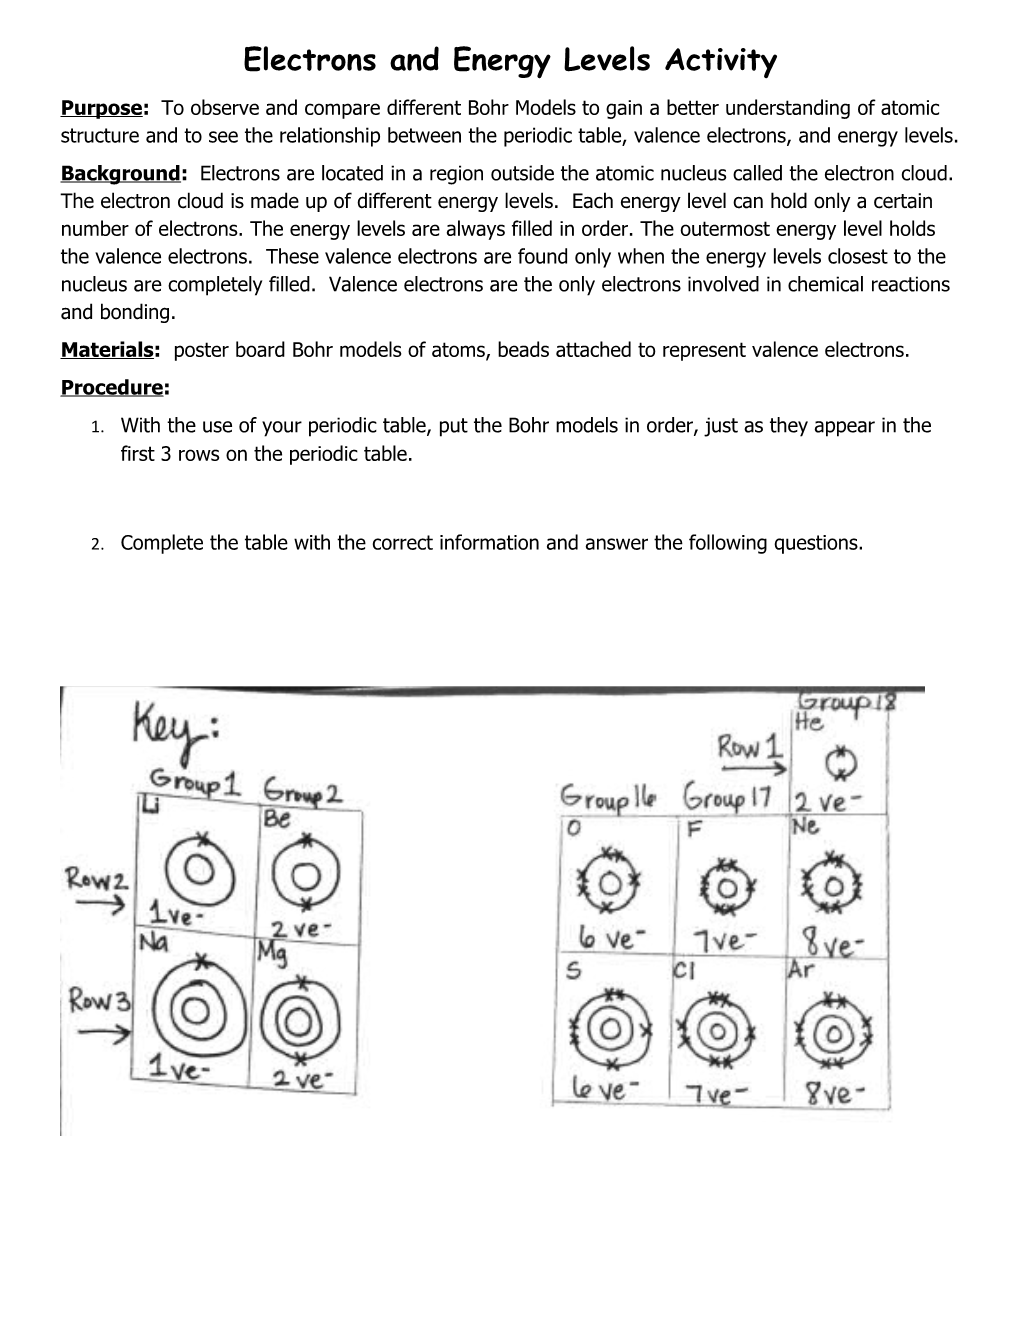 Electrons and Energy Levels Activity